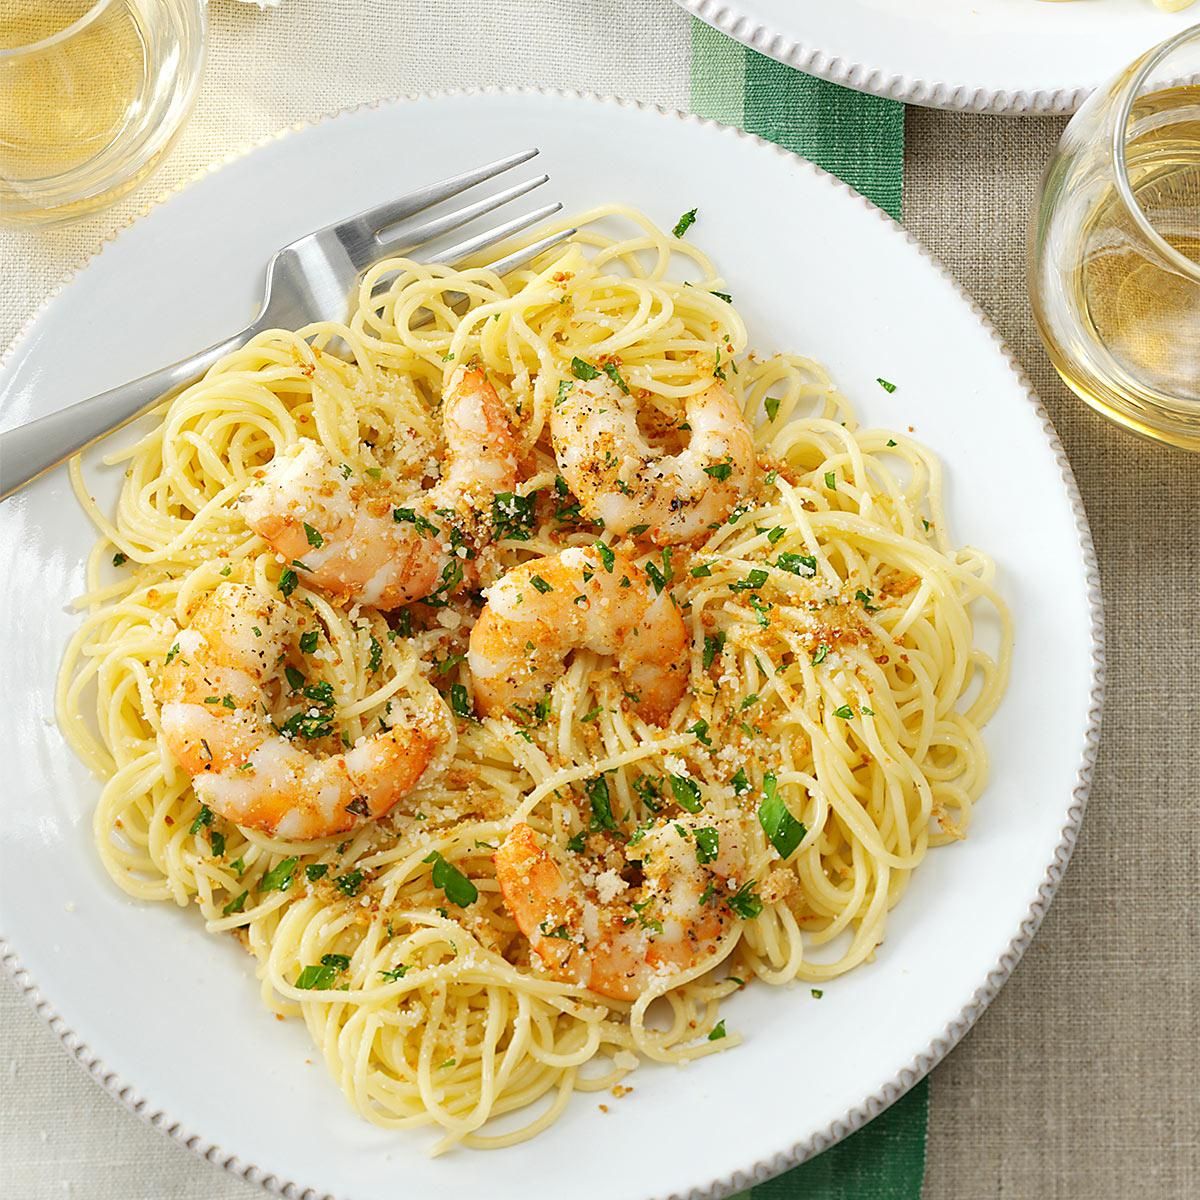 Delicious shrimp scampi pasta with spinach on a white plate with a fork.